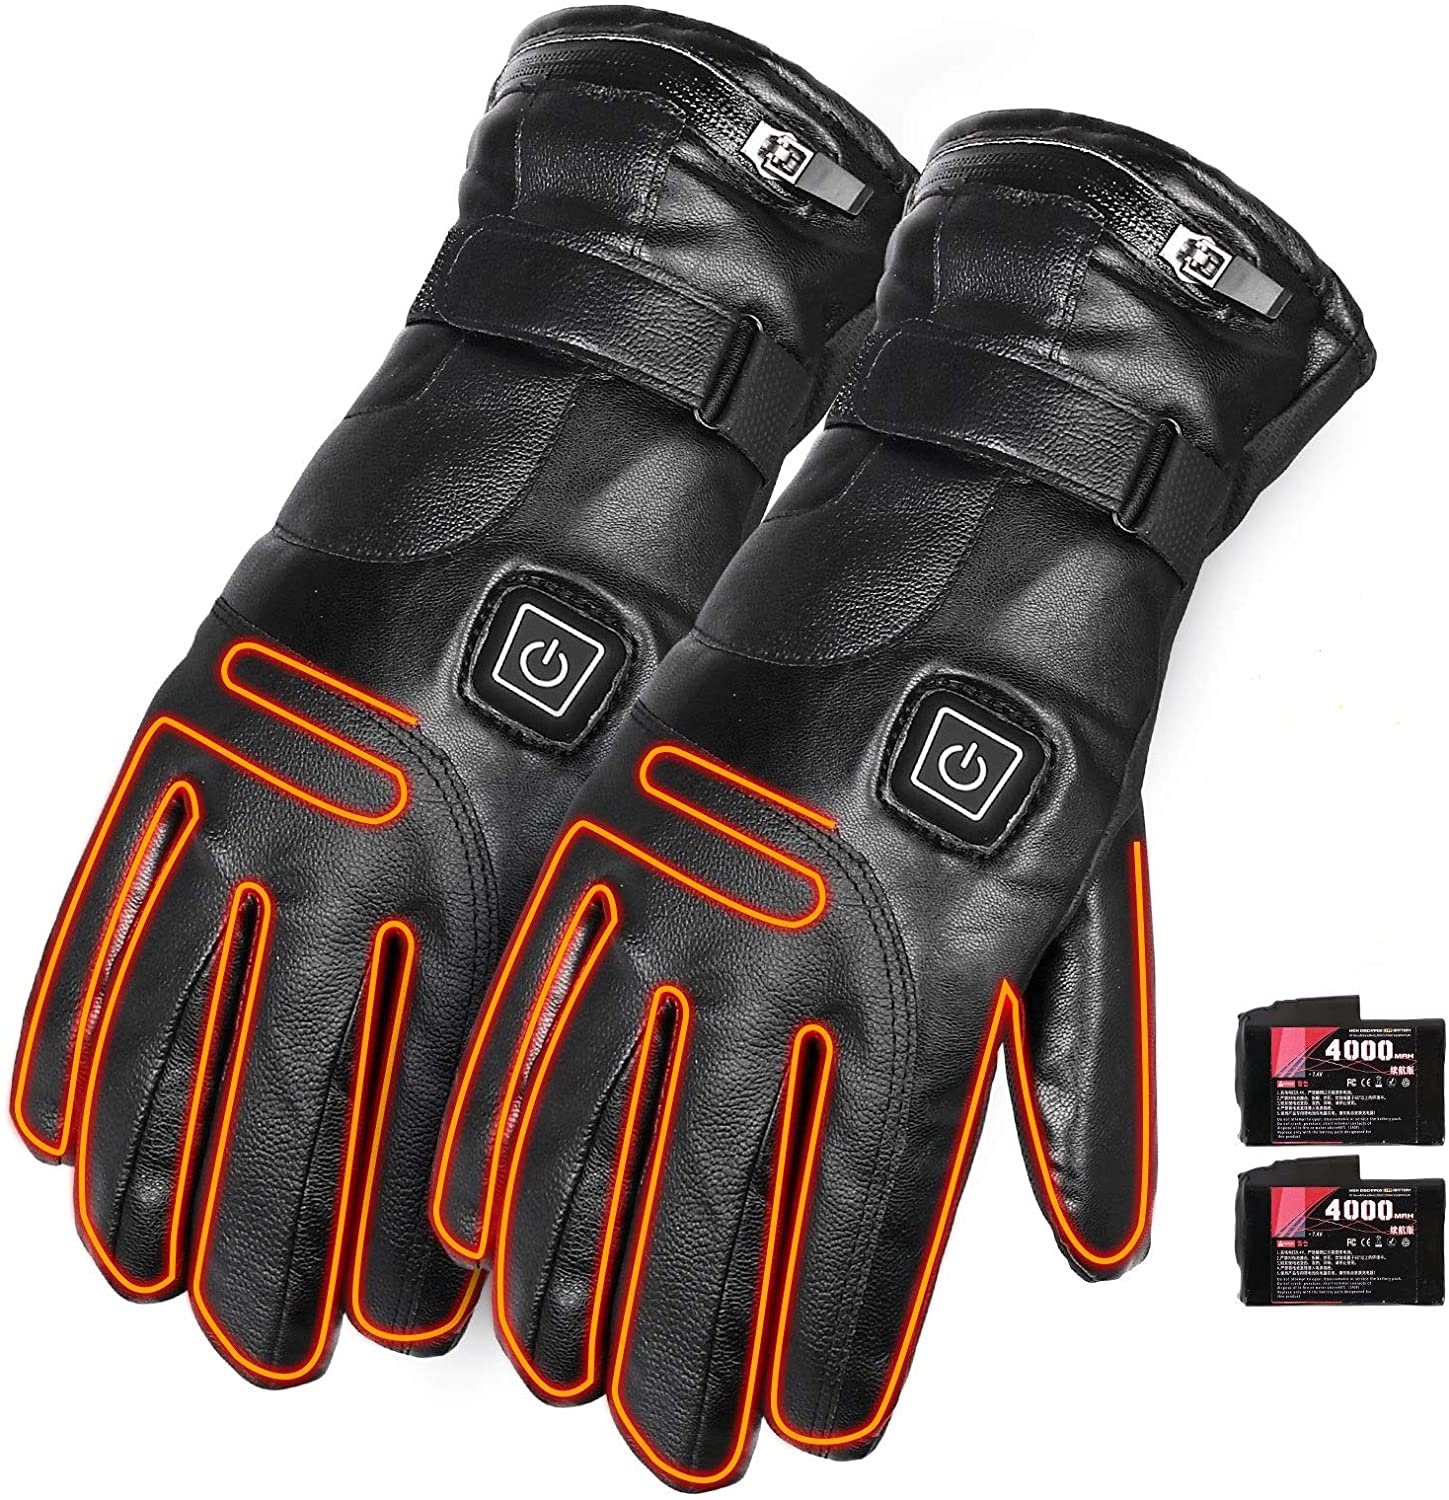 7.4V 4000mAh Heated Gloves for Motorcycle Rechargeable Electric Leather Gloves Battery Heating Thermal Gloves Anti Slip Touch Screen Temperature Control | Decor Gifts and More